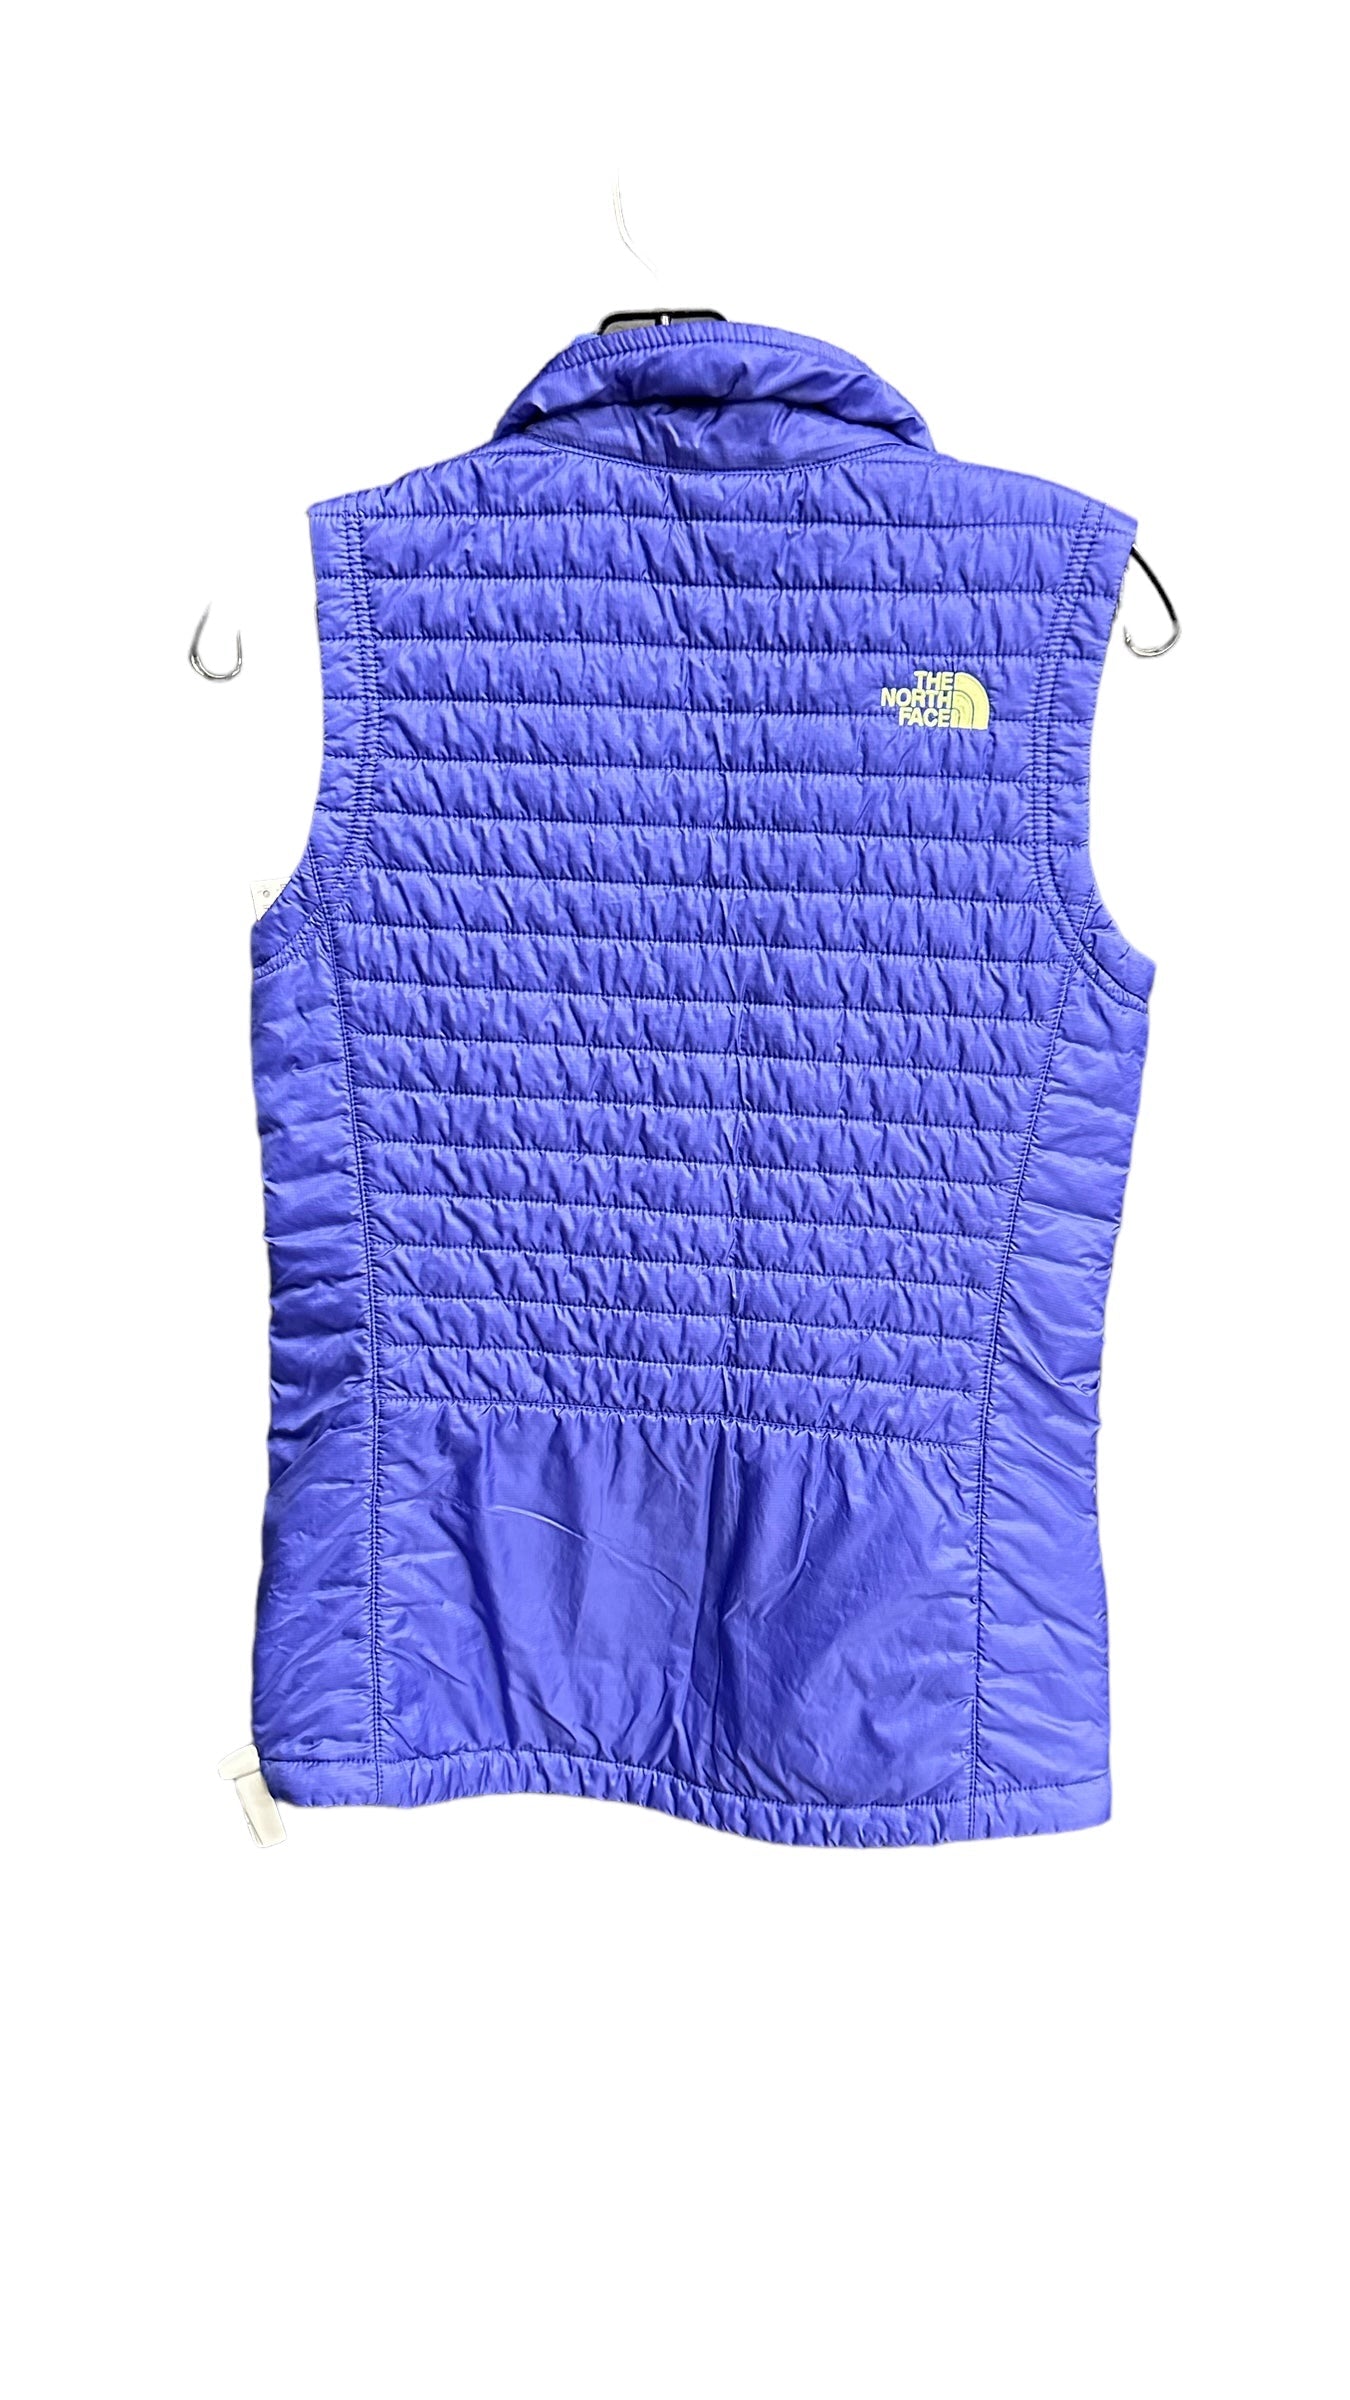 Vest Puffer & Quilted By The North Face  Size: Xs